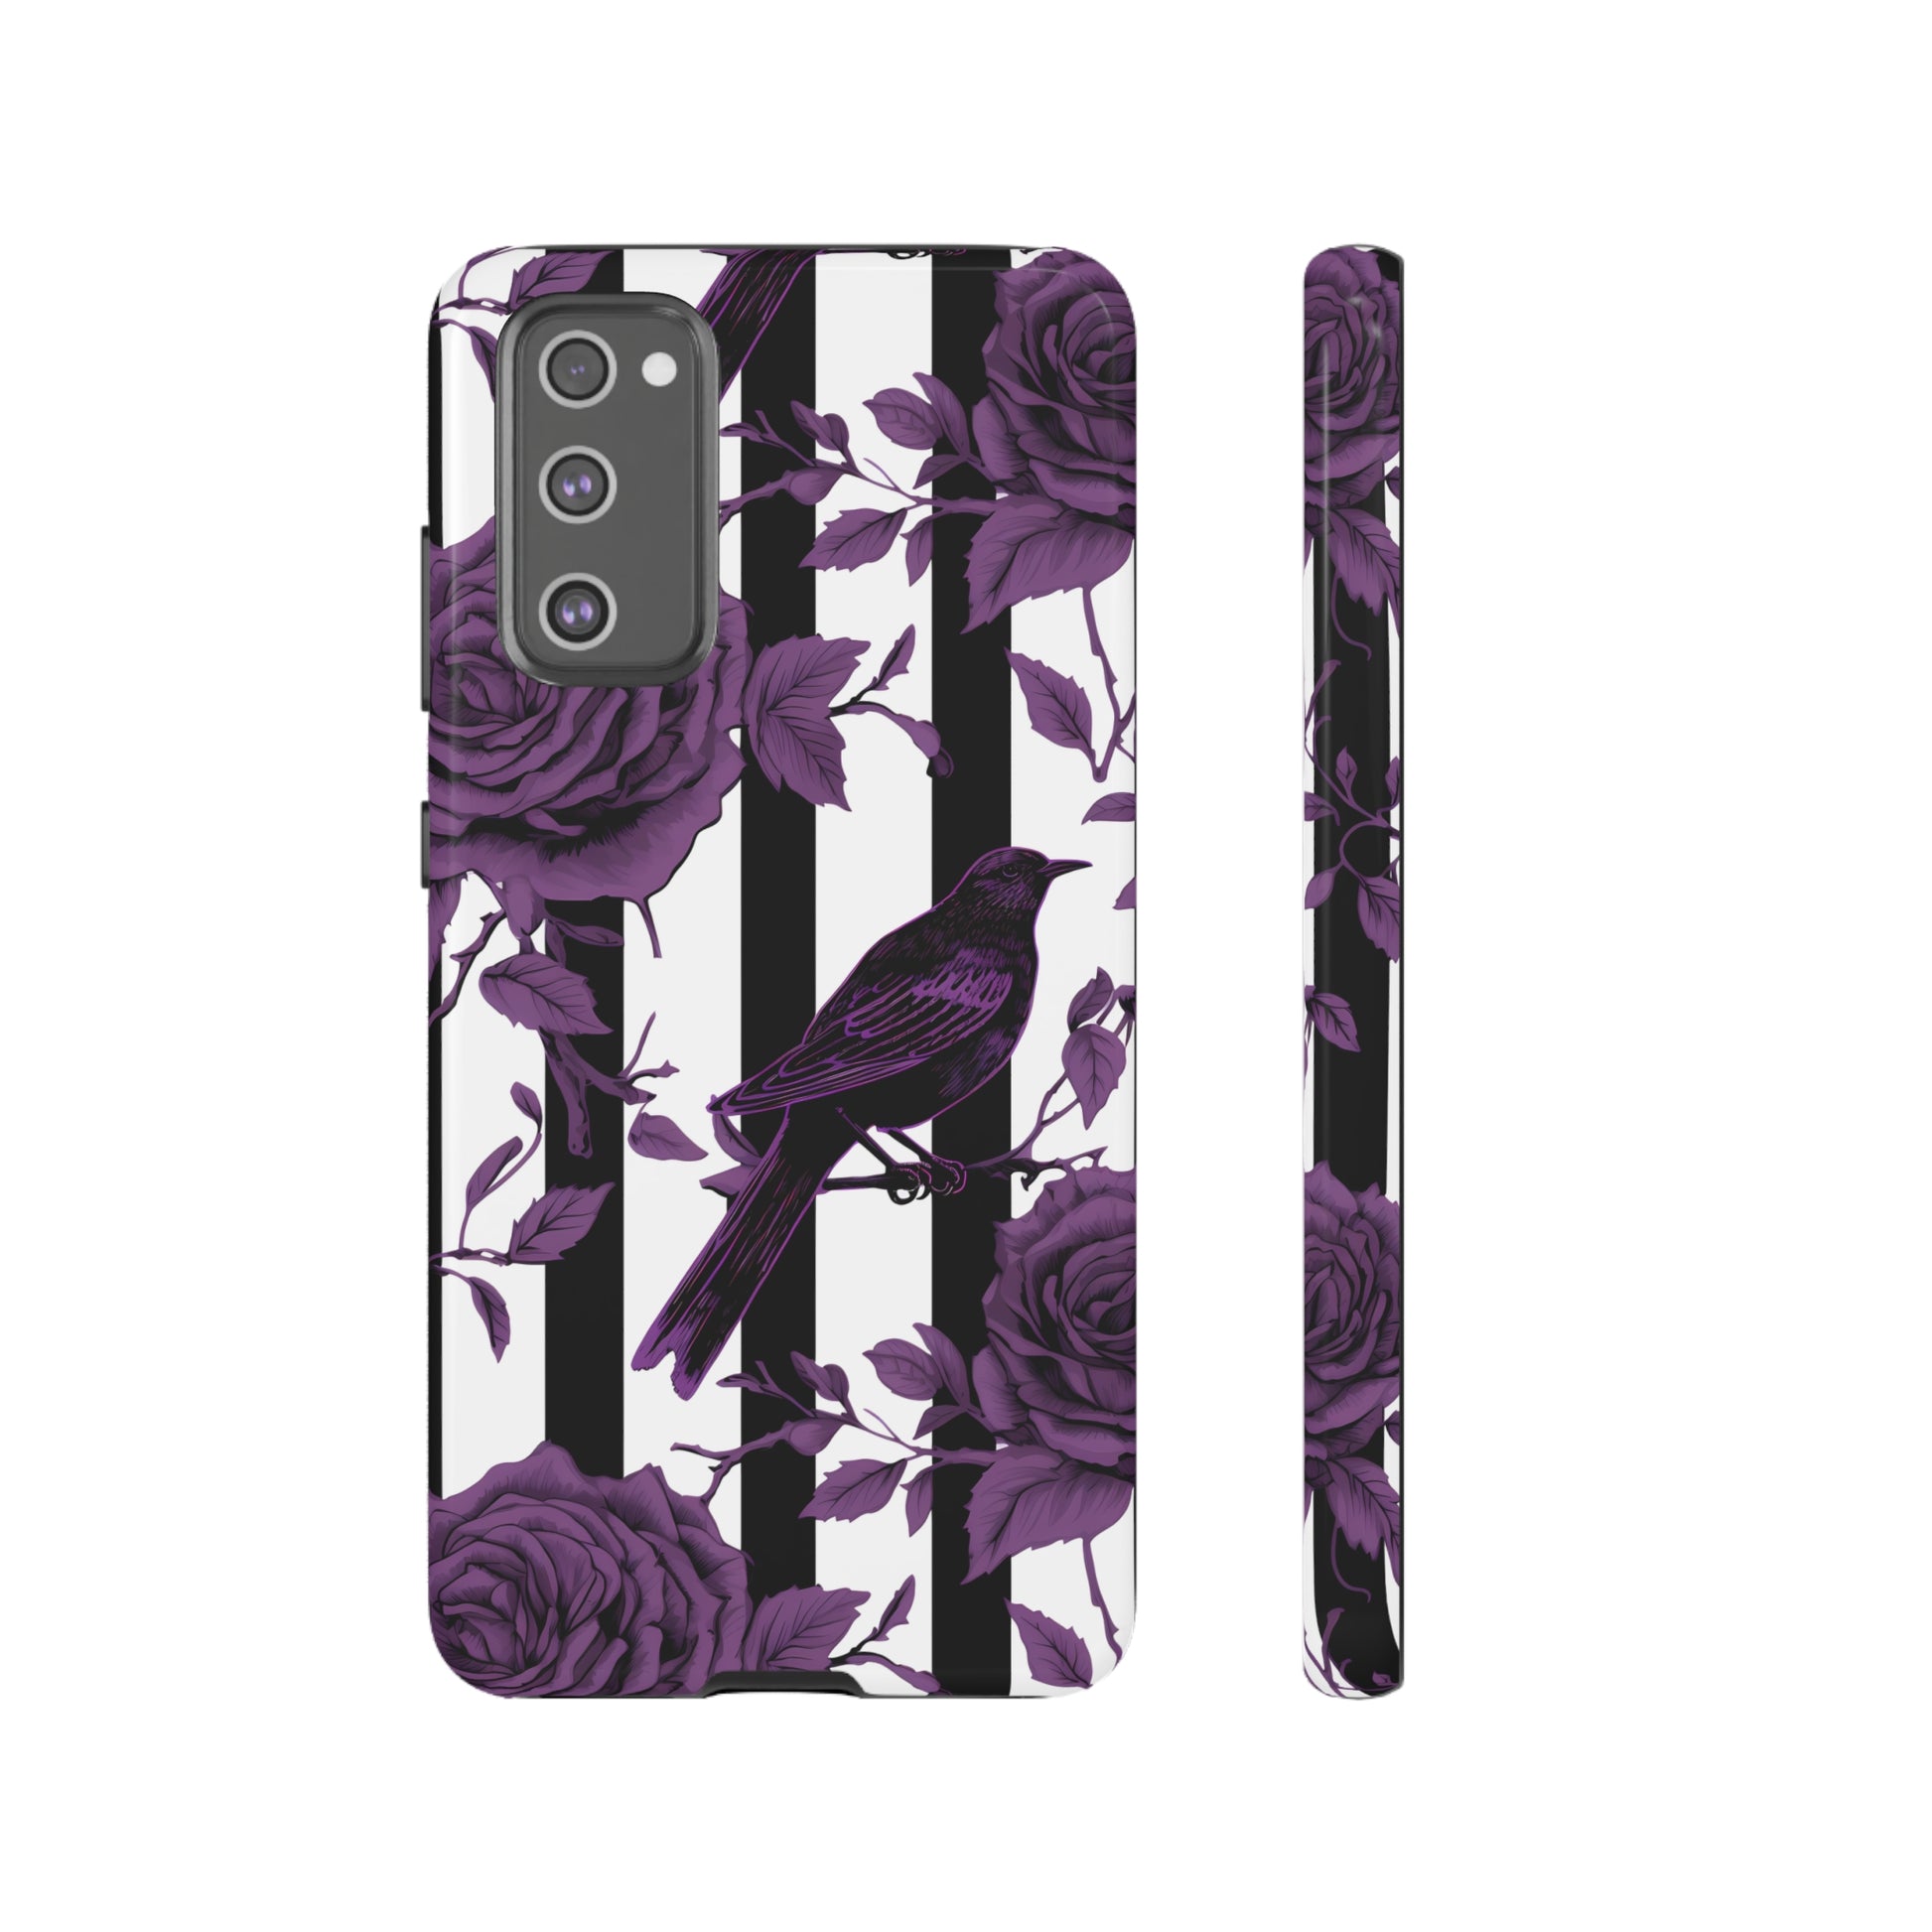 Striped Crows and Roses Tough Cases for iPhone Samsung Google PhonesPhone CaseVTZdesignsSamsung Galaxy S20 FEGlossyAccessoriescrowsGlossy